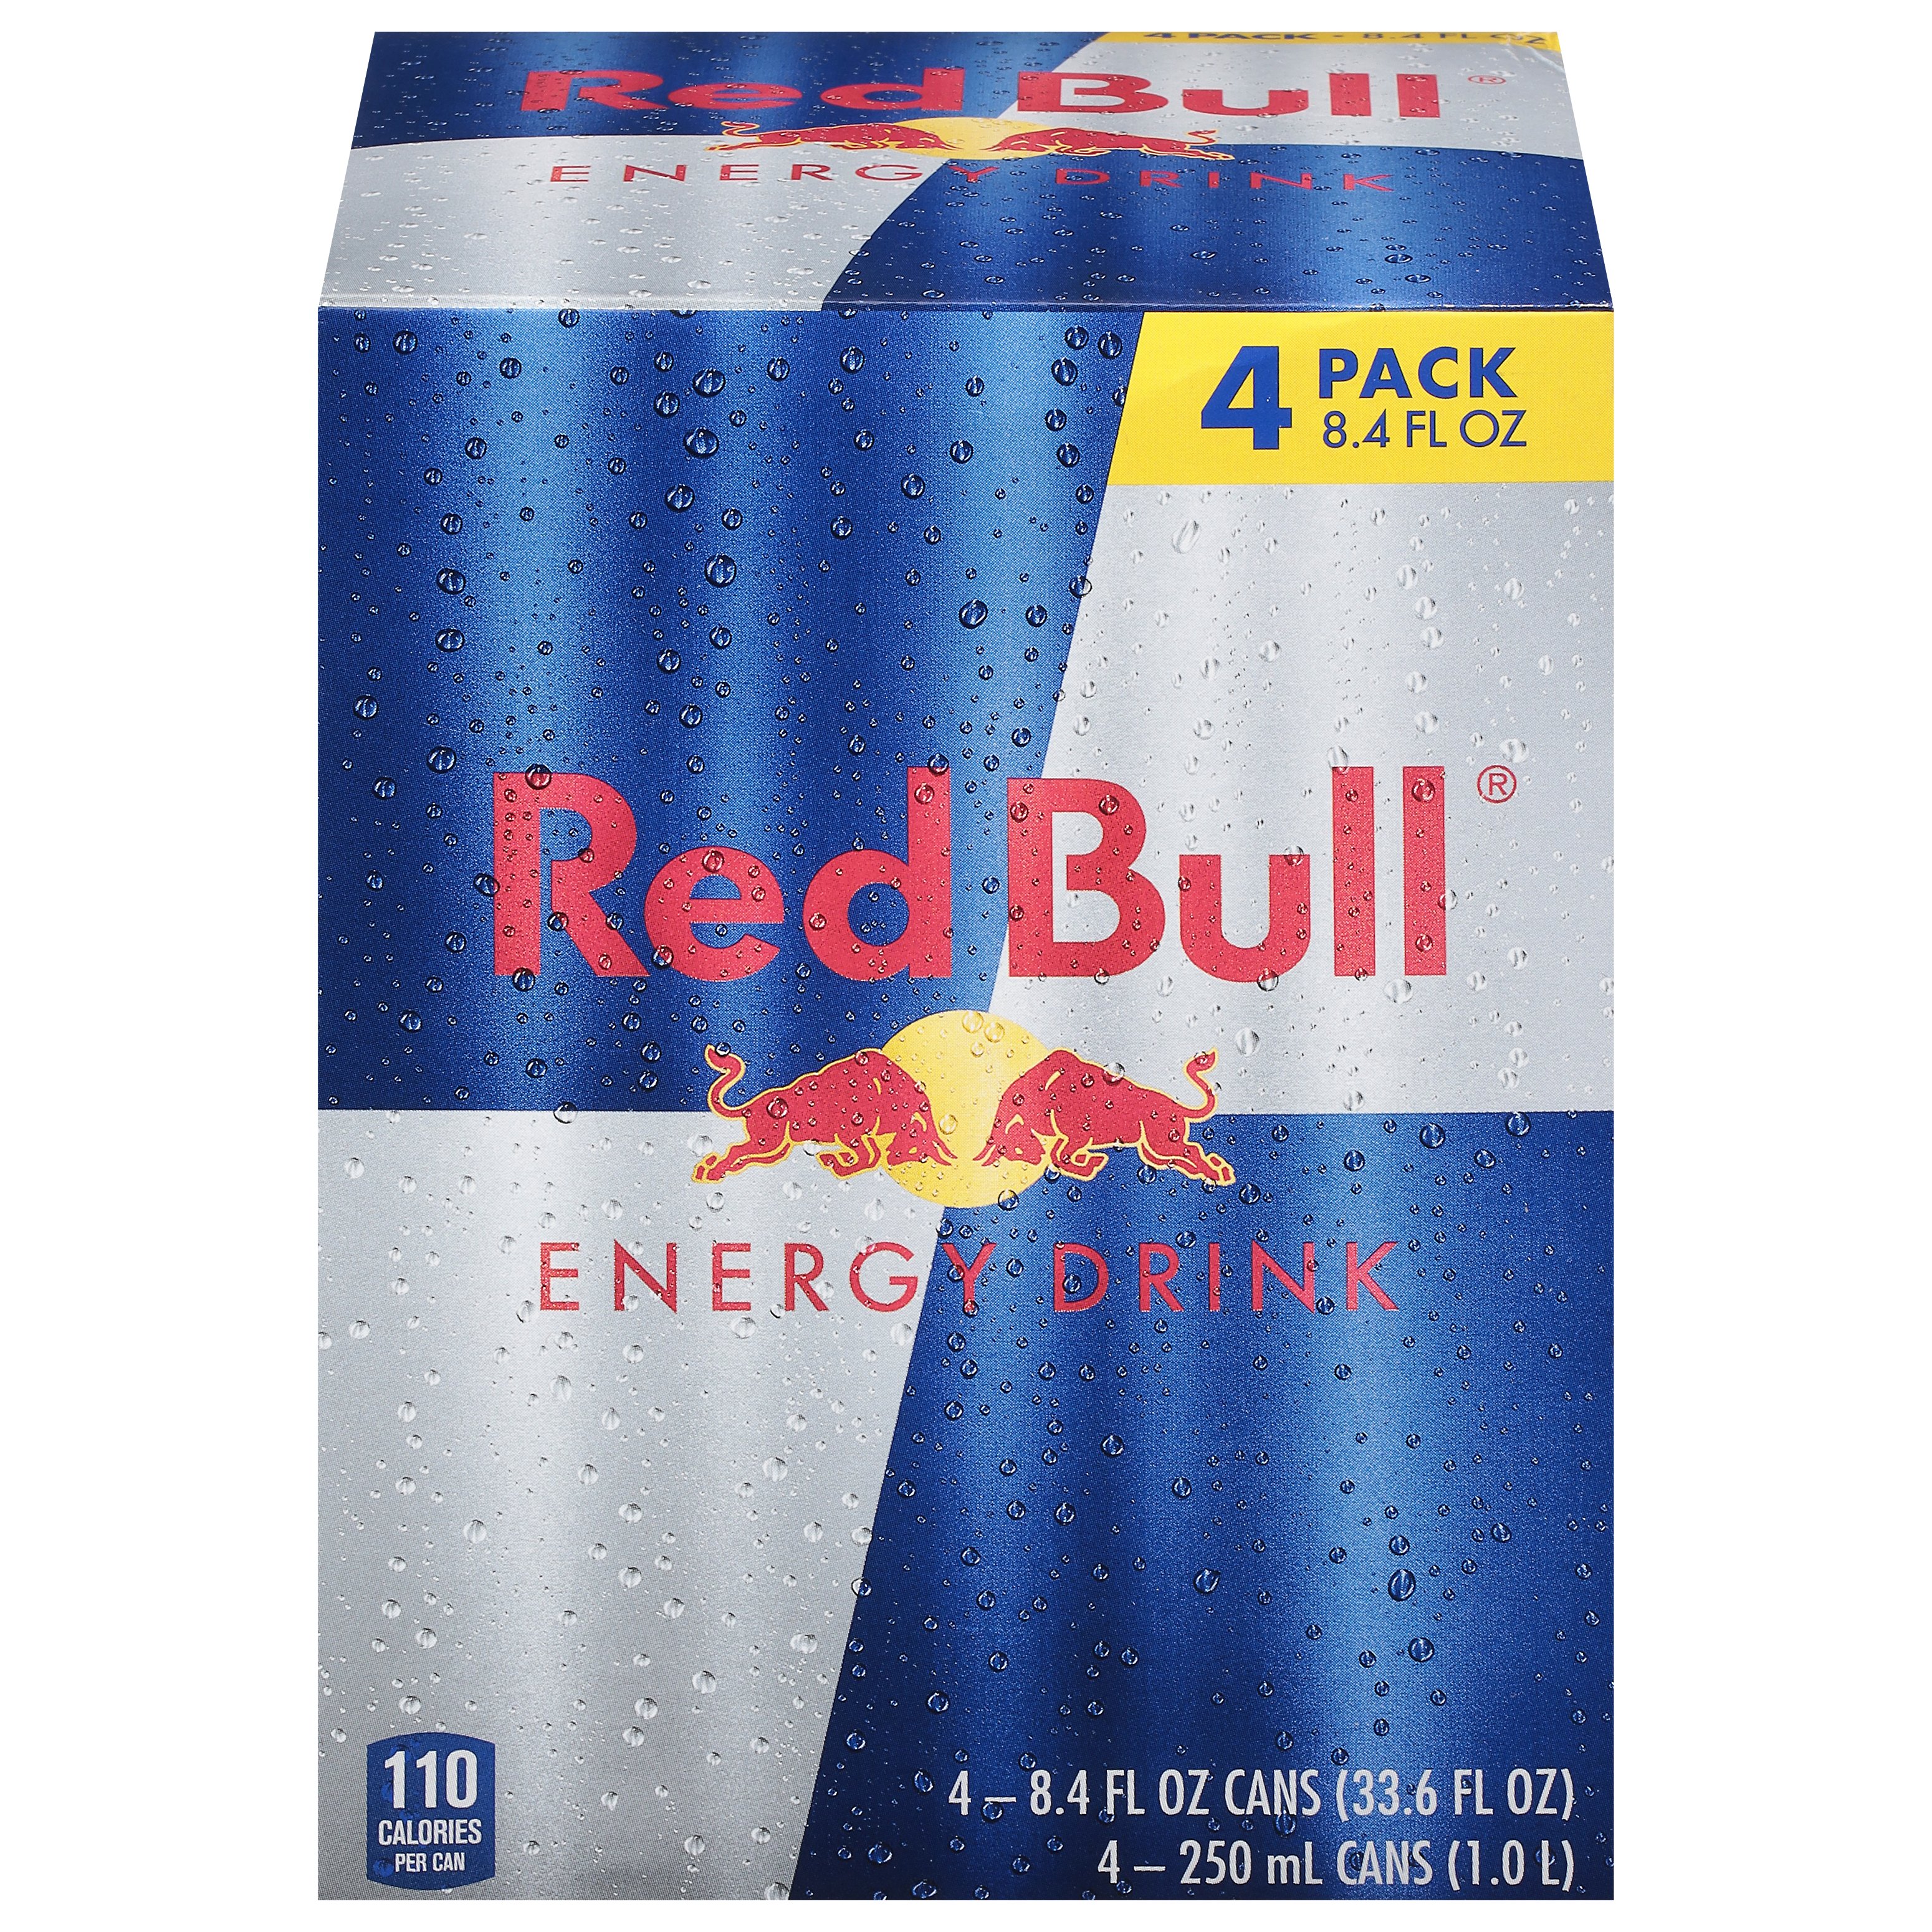 Red Bull Energy Drink 8 4 Oz Cans Shop Sports Energy Drinks At H E B